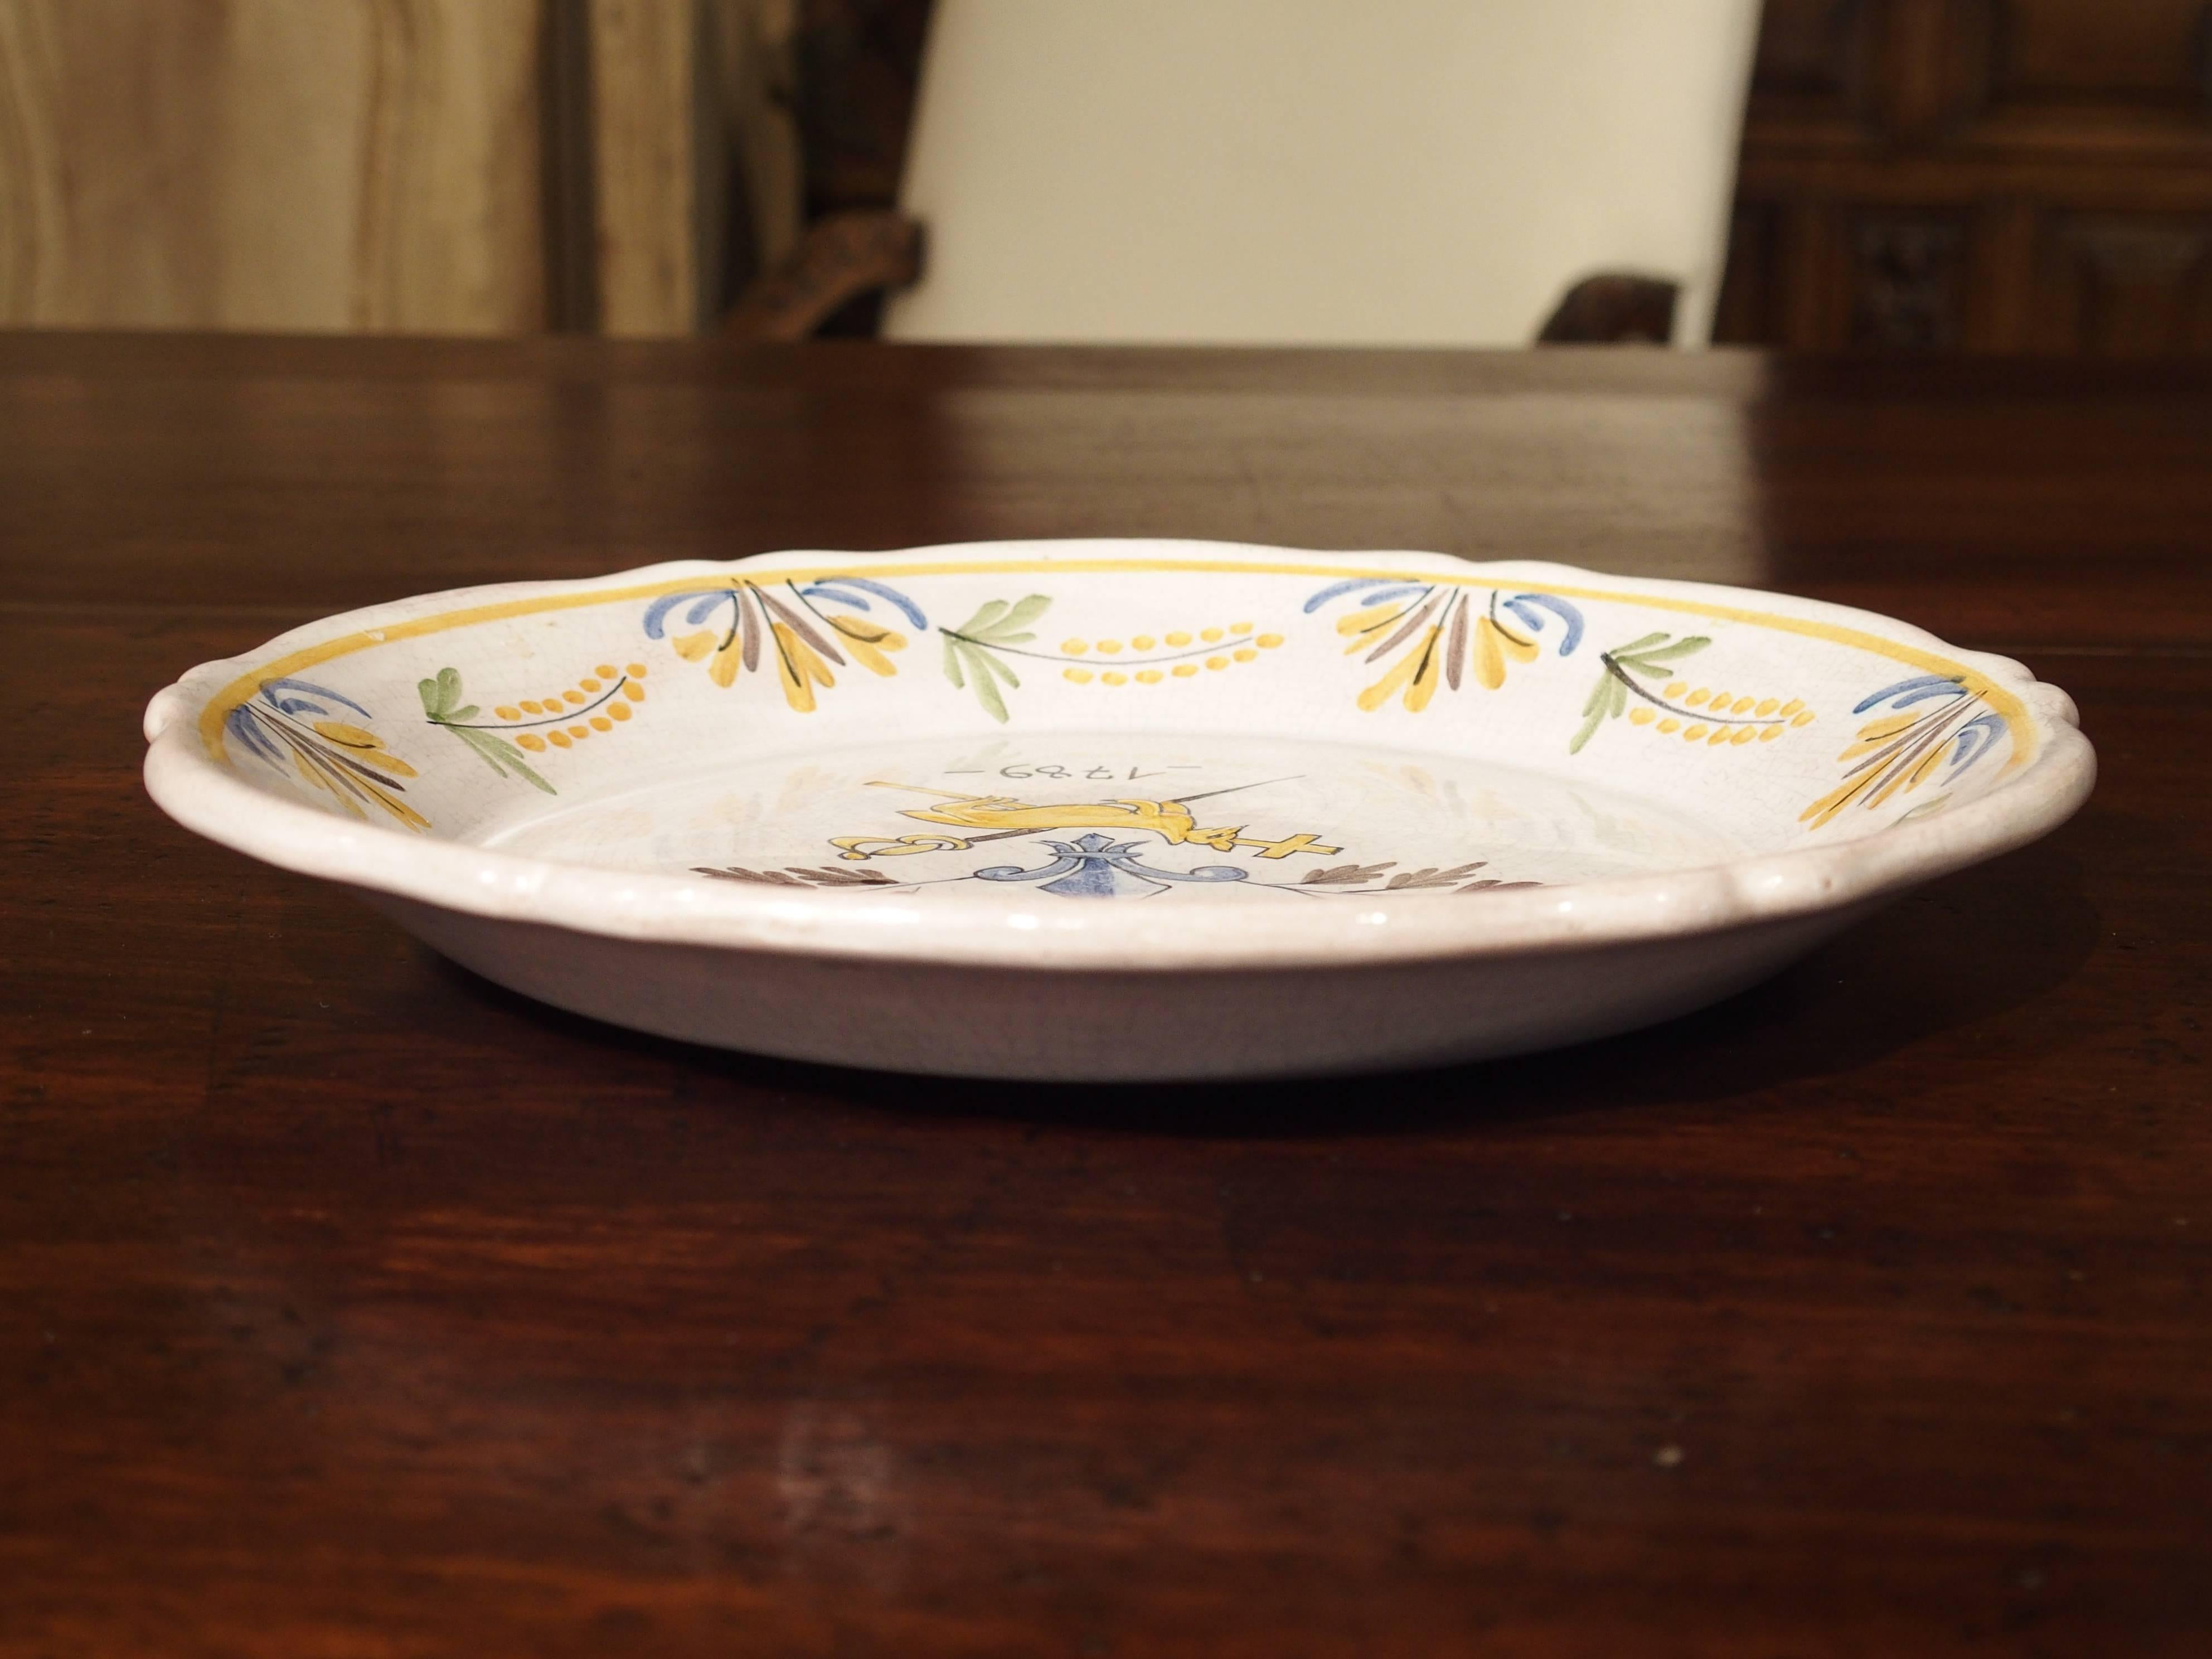 This reproduction French plate is after an original 18th century French Faience plate. It has a crown over a fleur-de-lis with an animal in front of a sword and cross. A date of 1789 is beneath this. It is hand-painted and very decorative. These